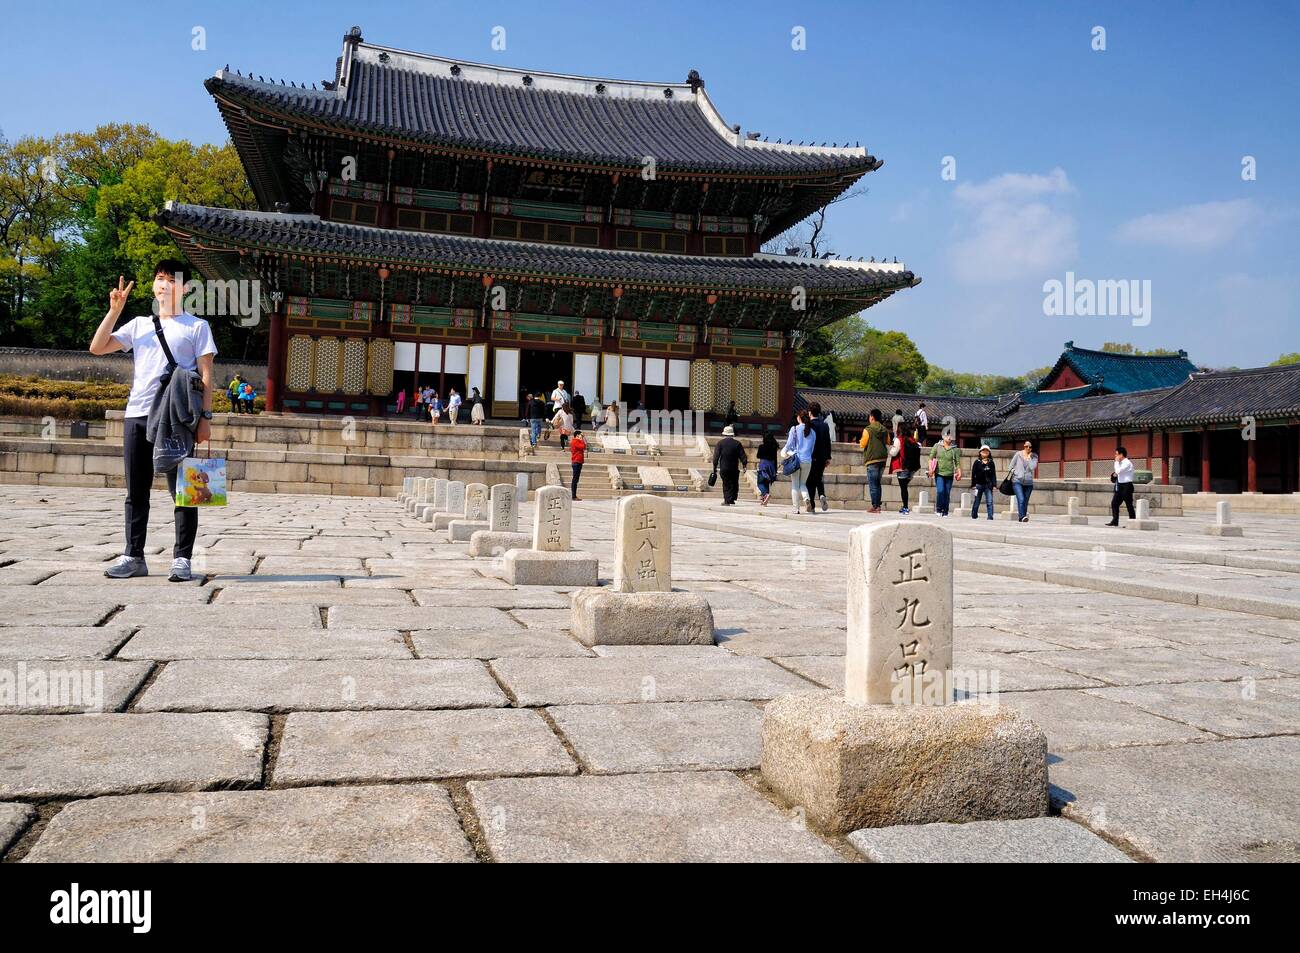 South Korea, Seoul, Changdeokgung Palace (Prospering Virtue Palace) built by the kings of the Joseon Dynasty, listed as World Heritage by UNESCO Stock Photo